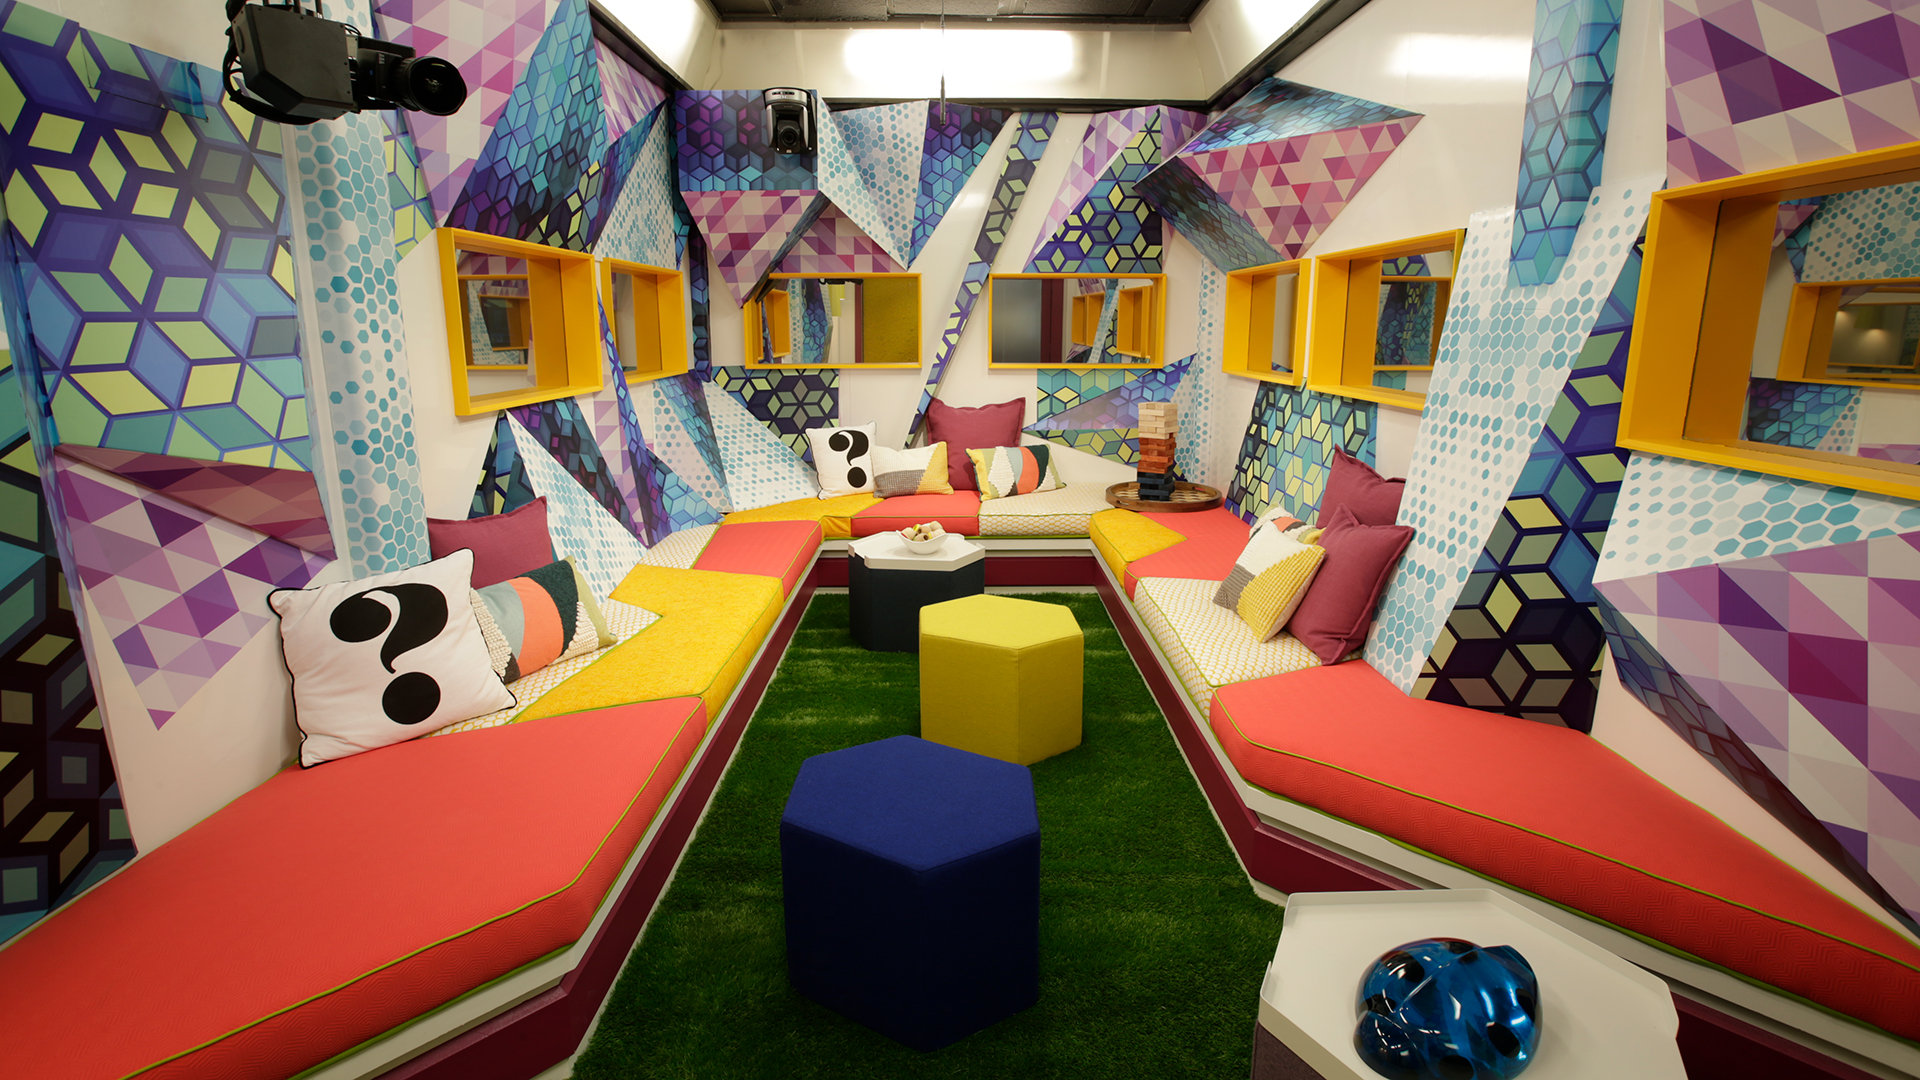 The Kaleidoscope Lounge is a party of patterns, with multi-dimensional shapes and colorful graphics.